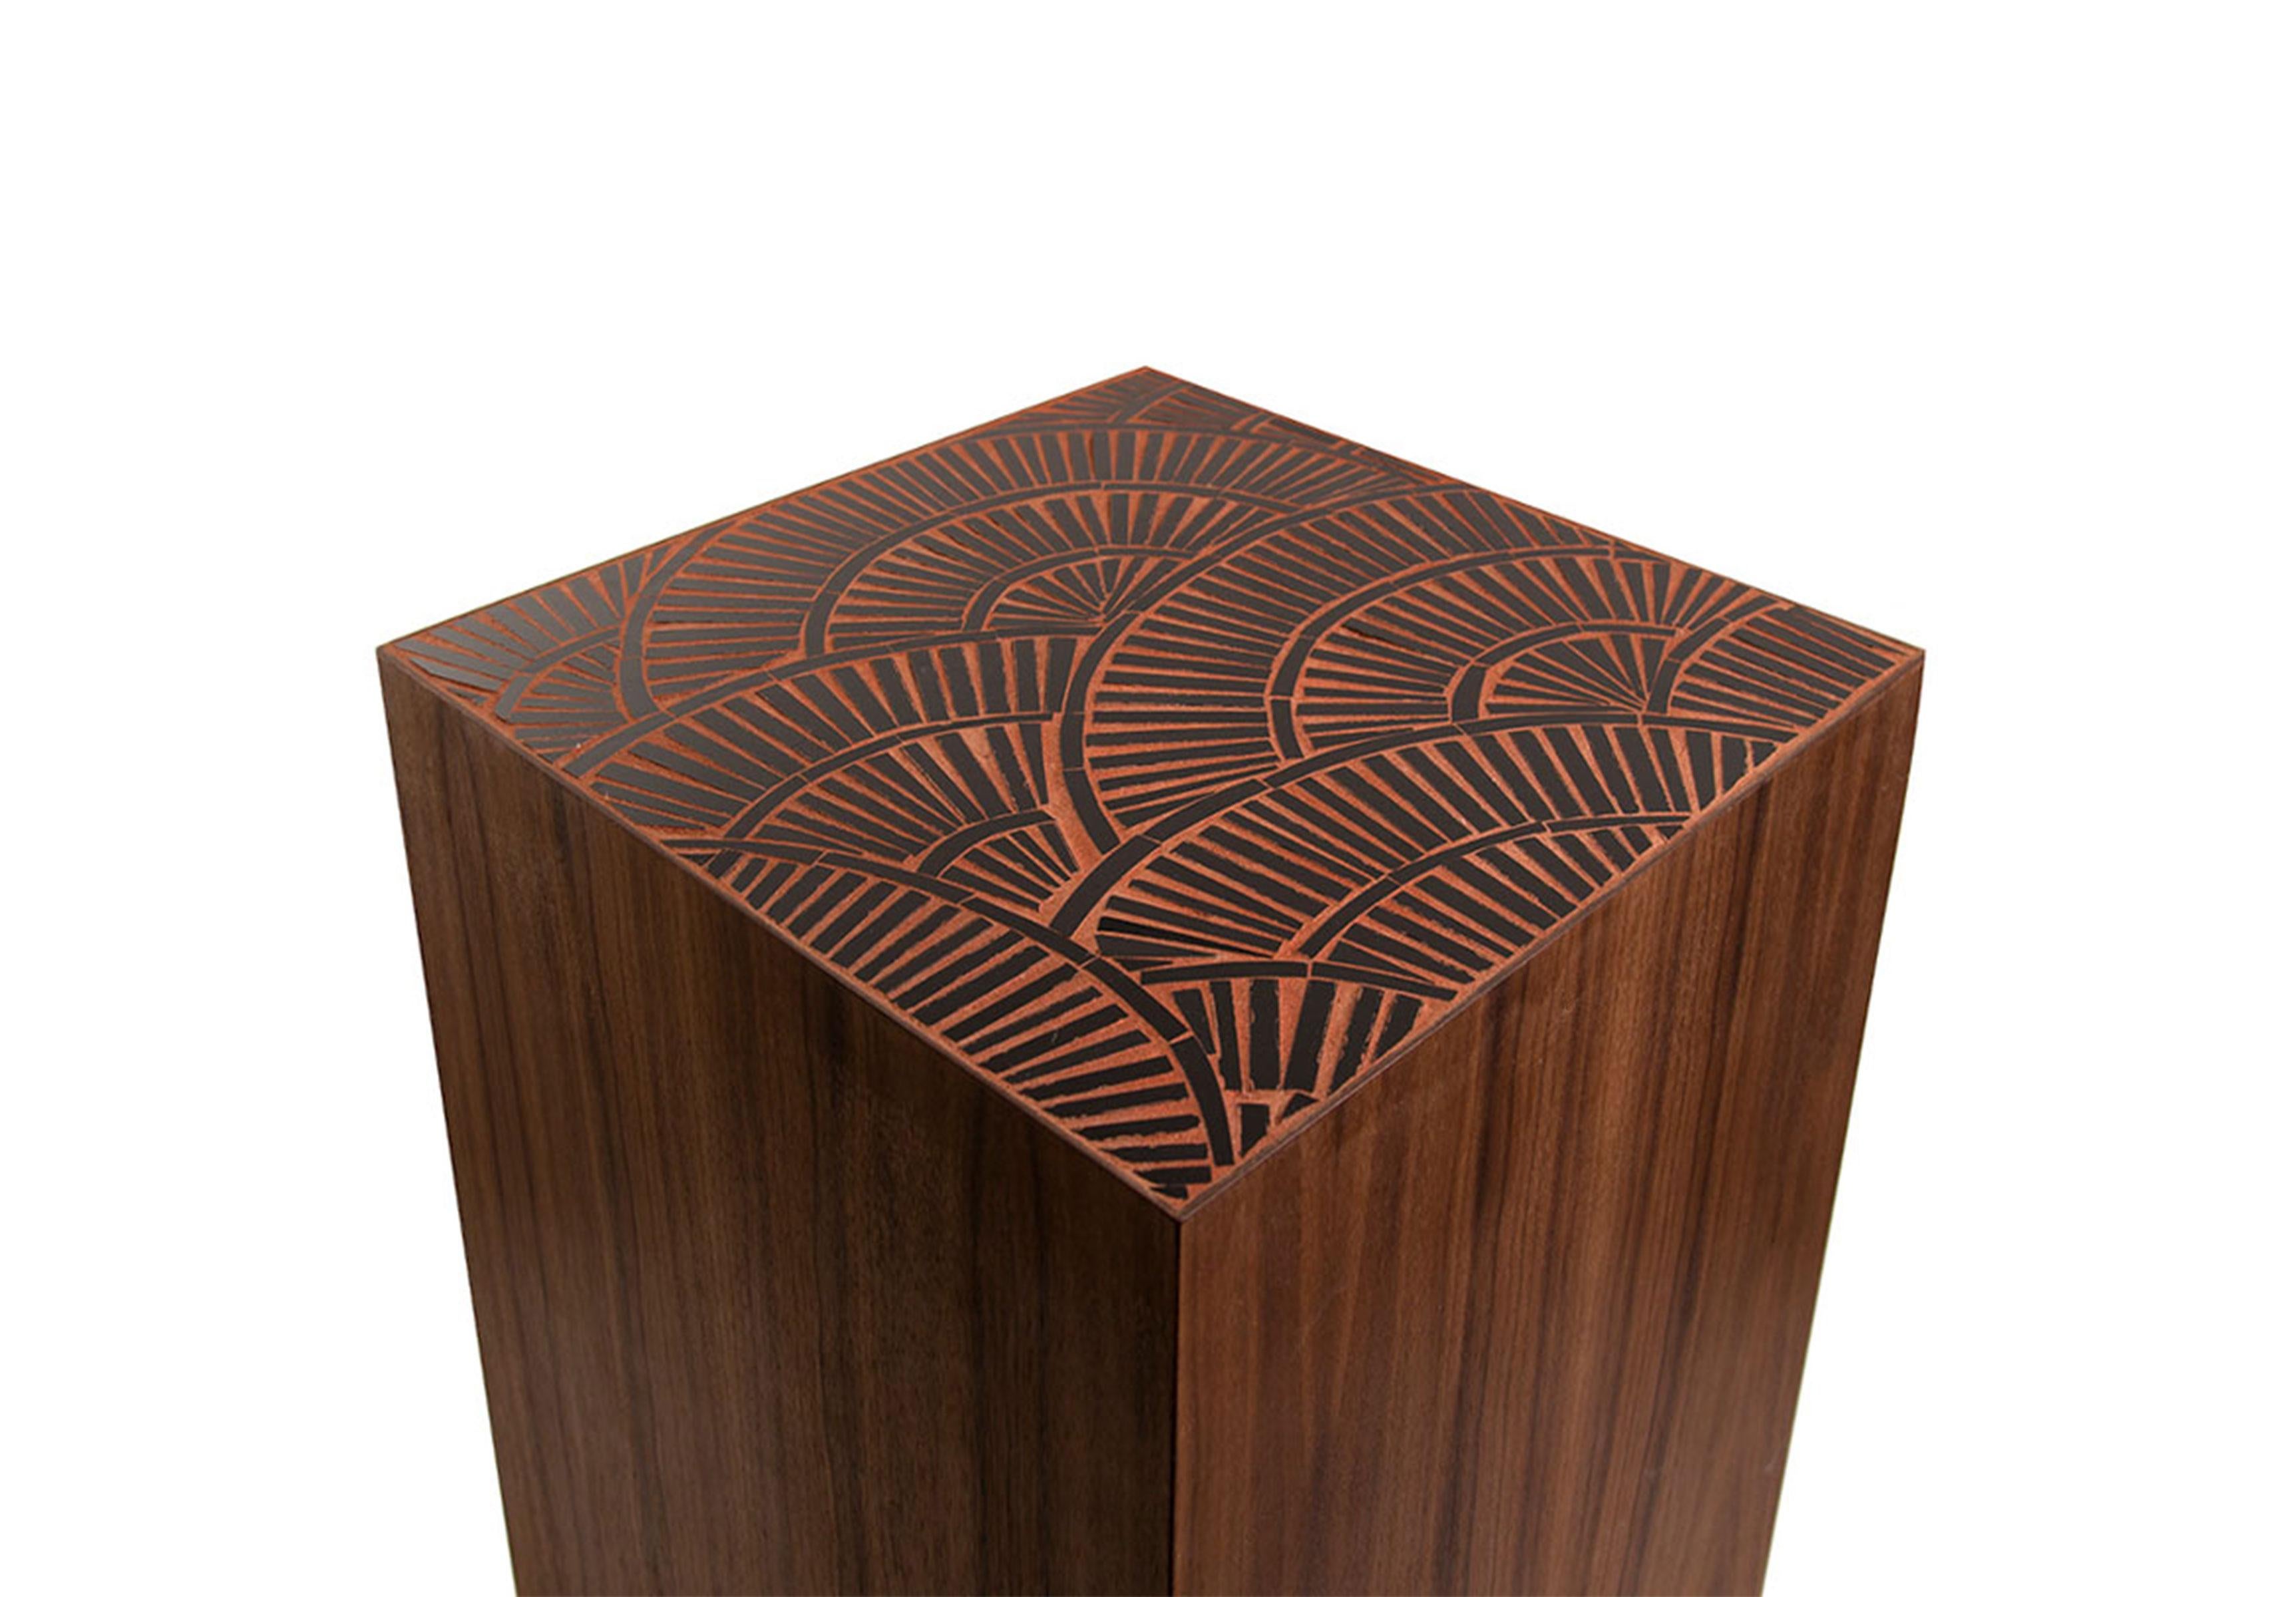 The Natura Pedestal by Ercole Home has a natural wood finish on walnut. Hand-cut glass mosaics in Black glass mosaic decorate the top surface in Sequoia pattern.
Custom sizes and finishes are available.
Made in New York City.

#pedestal #stool